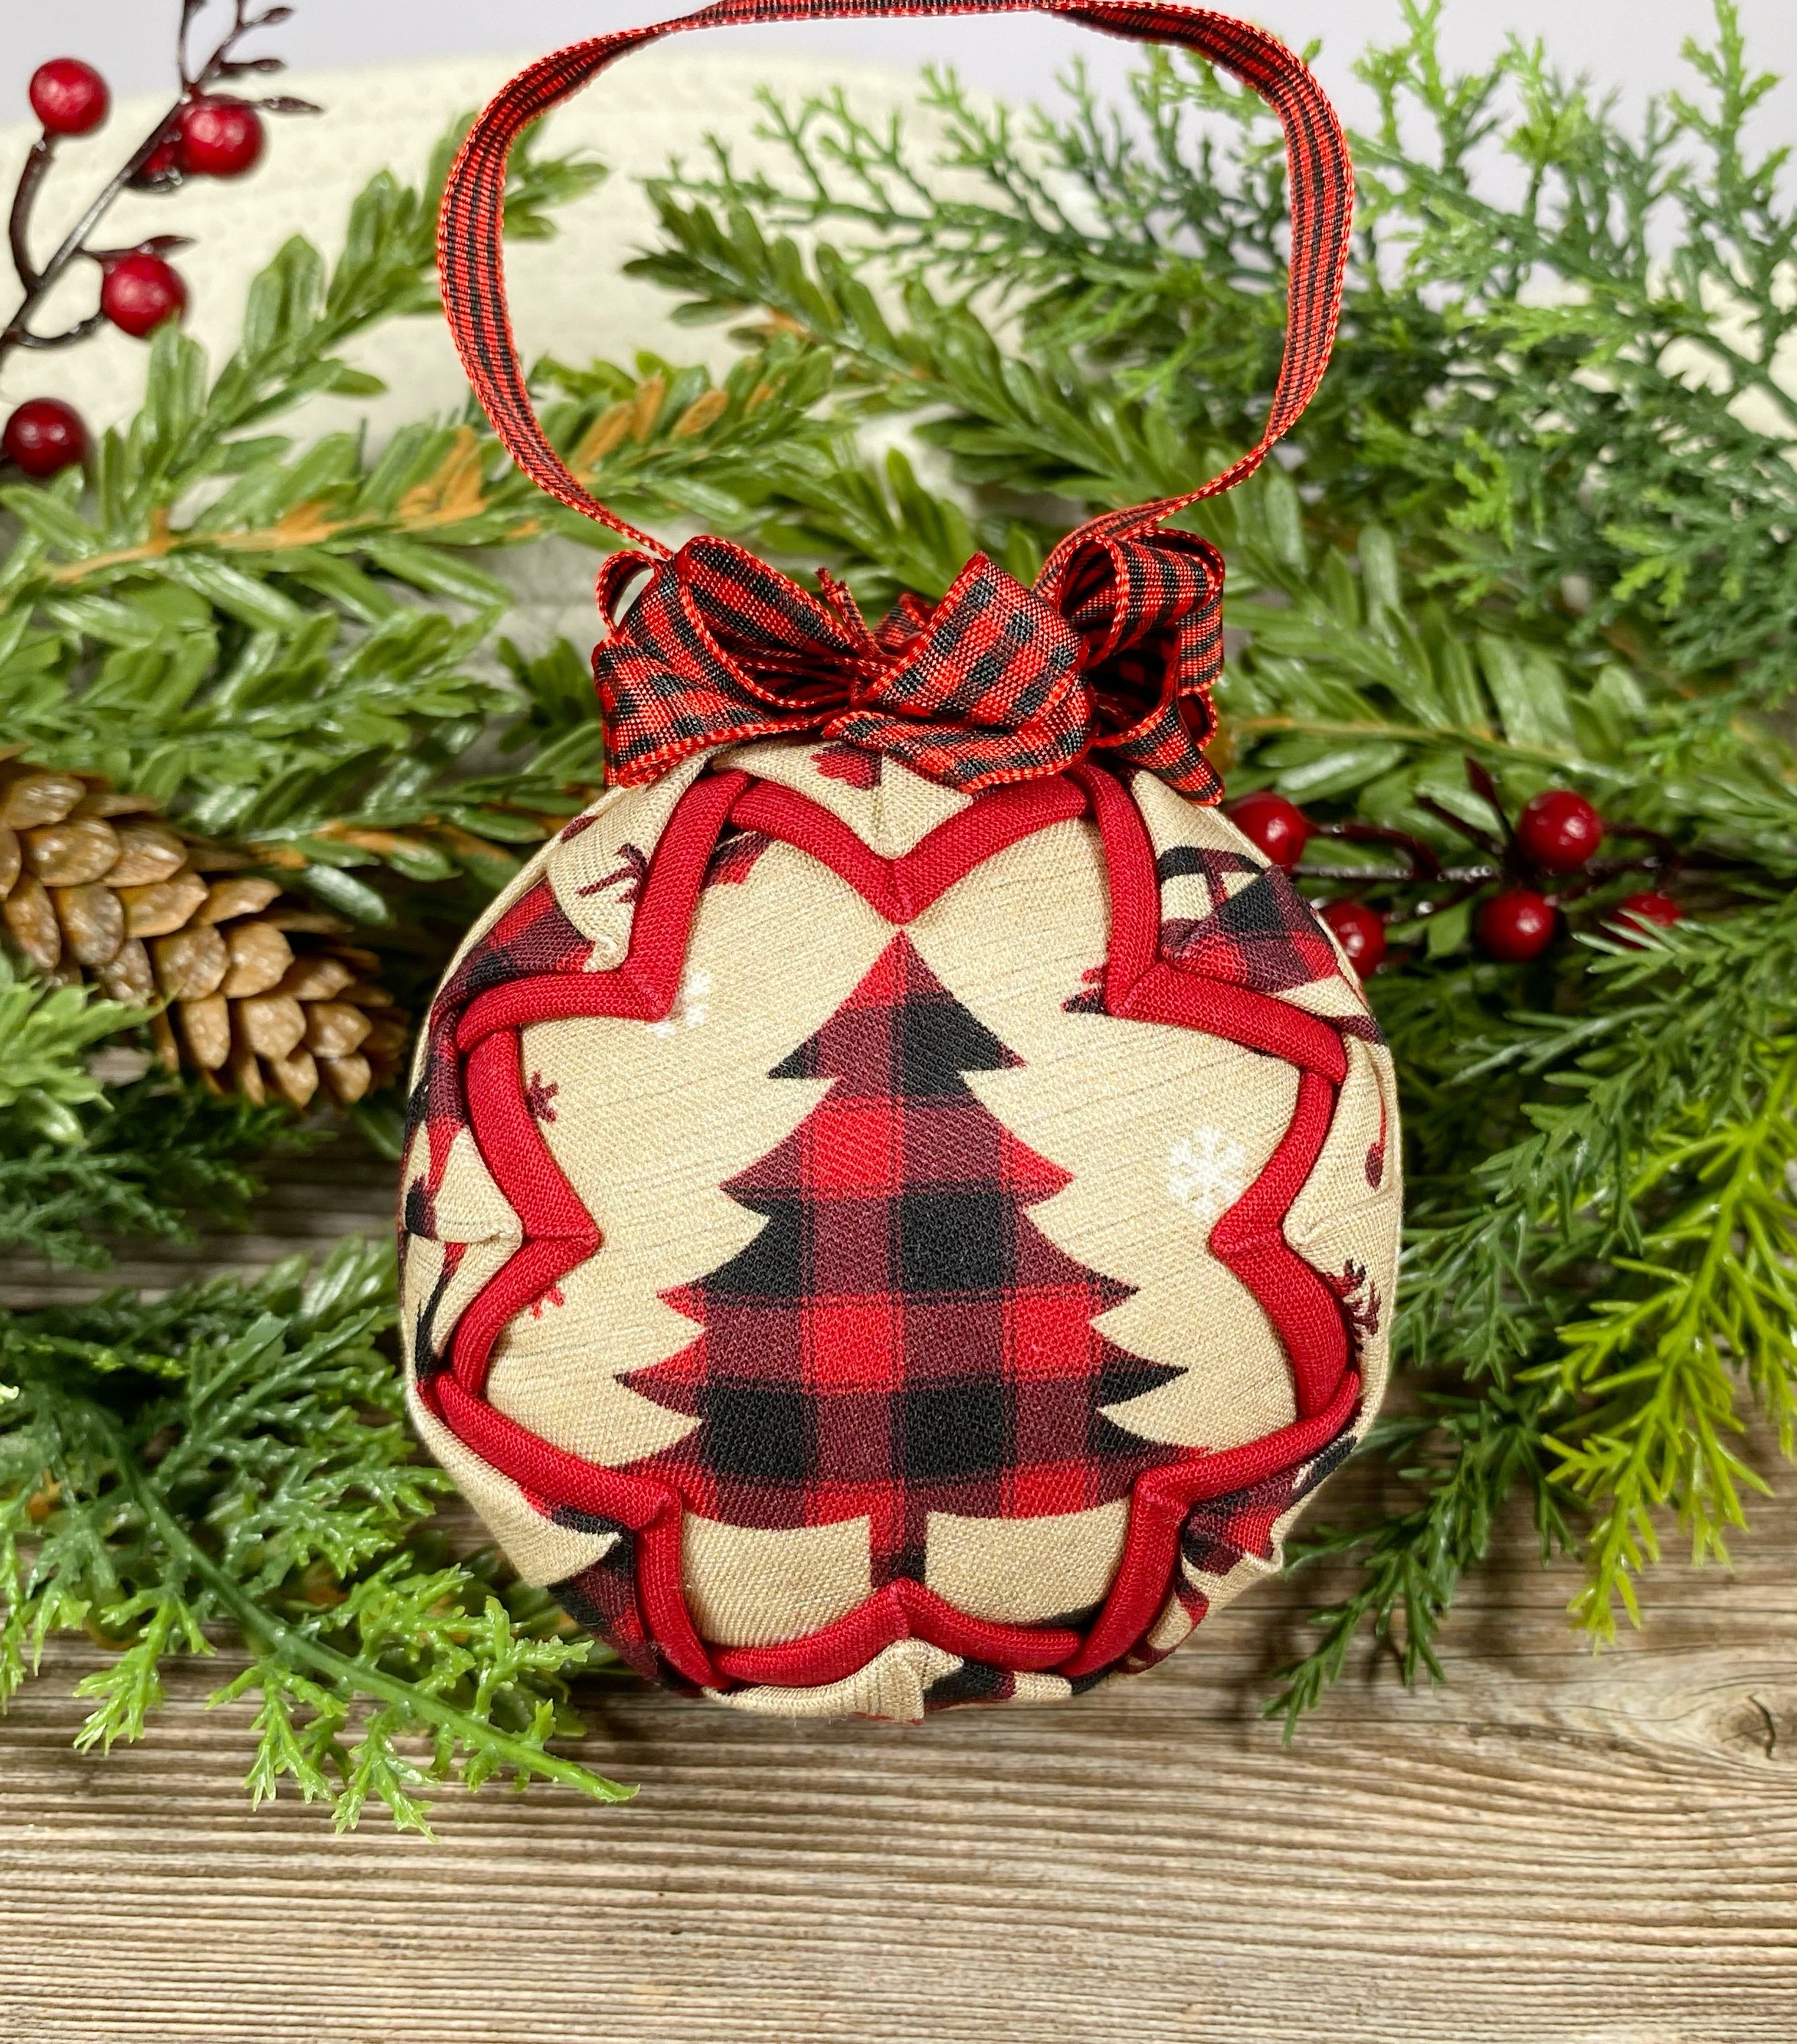  Christmas Tree Ornaments Decorations Fabric Assorted